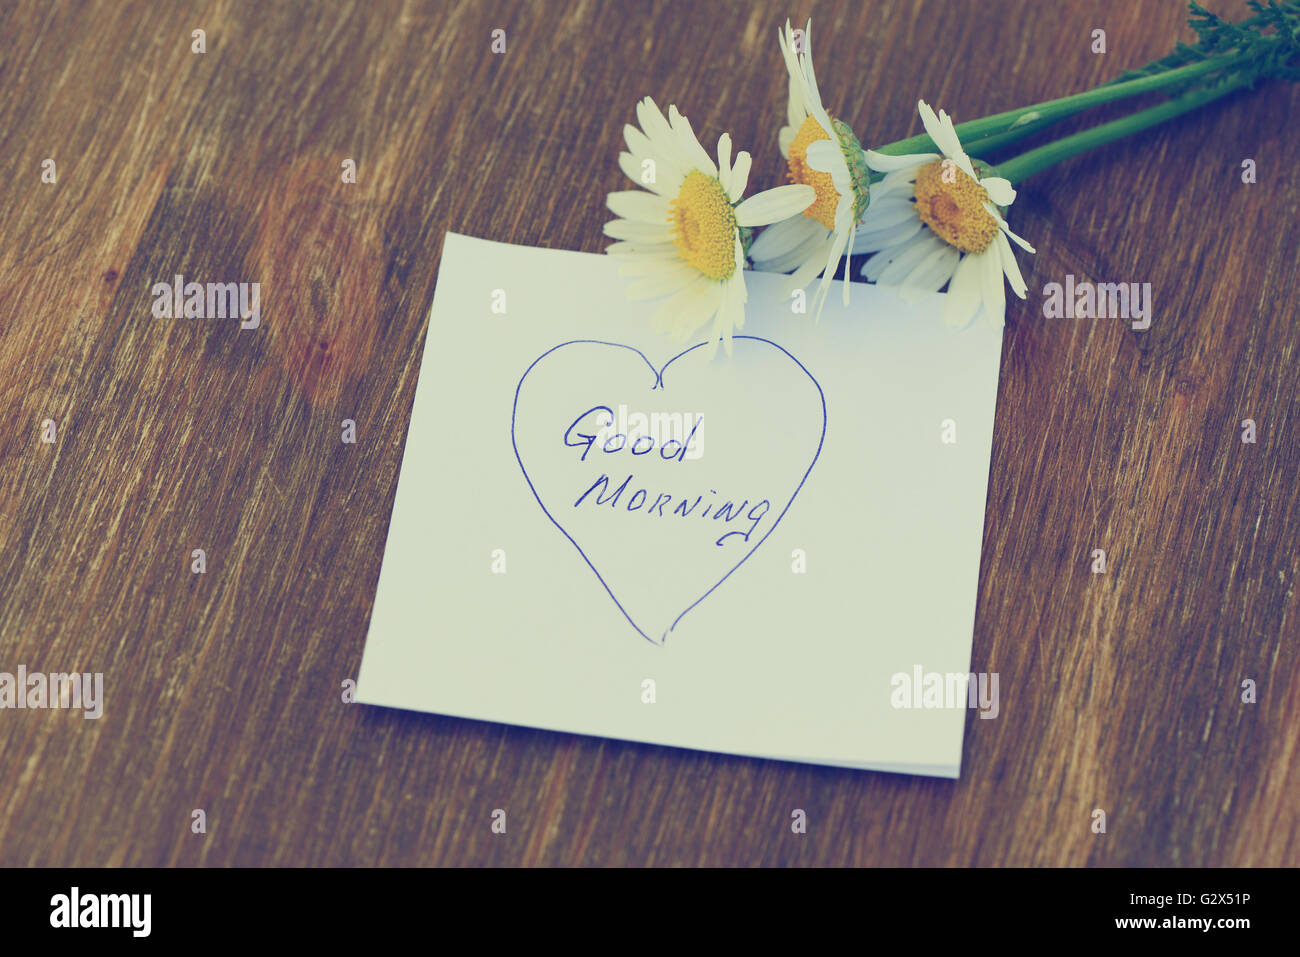 Daisy flower and piece of paper with text 'good morning' on the wooden table. Photo in vintage style Stock Photo